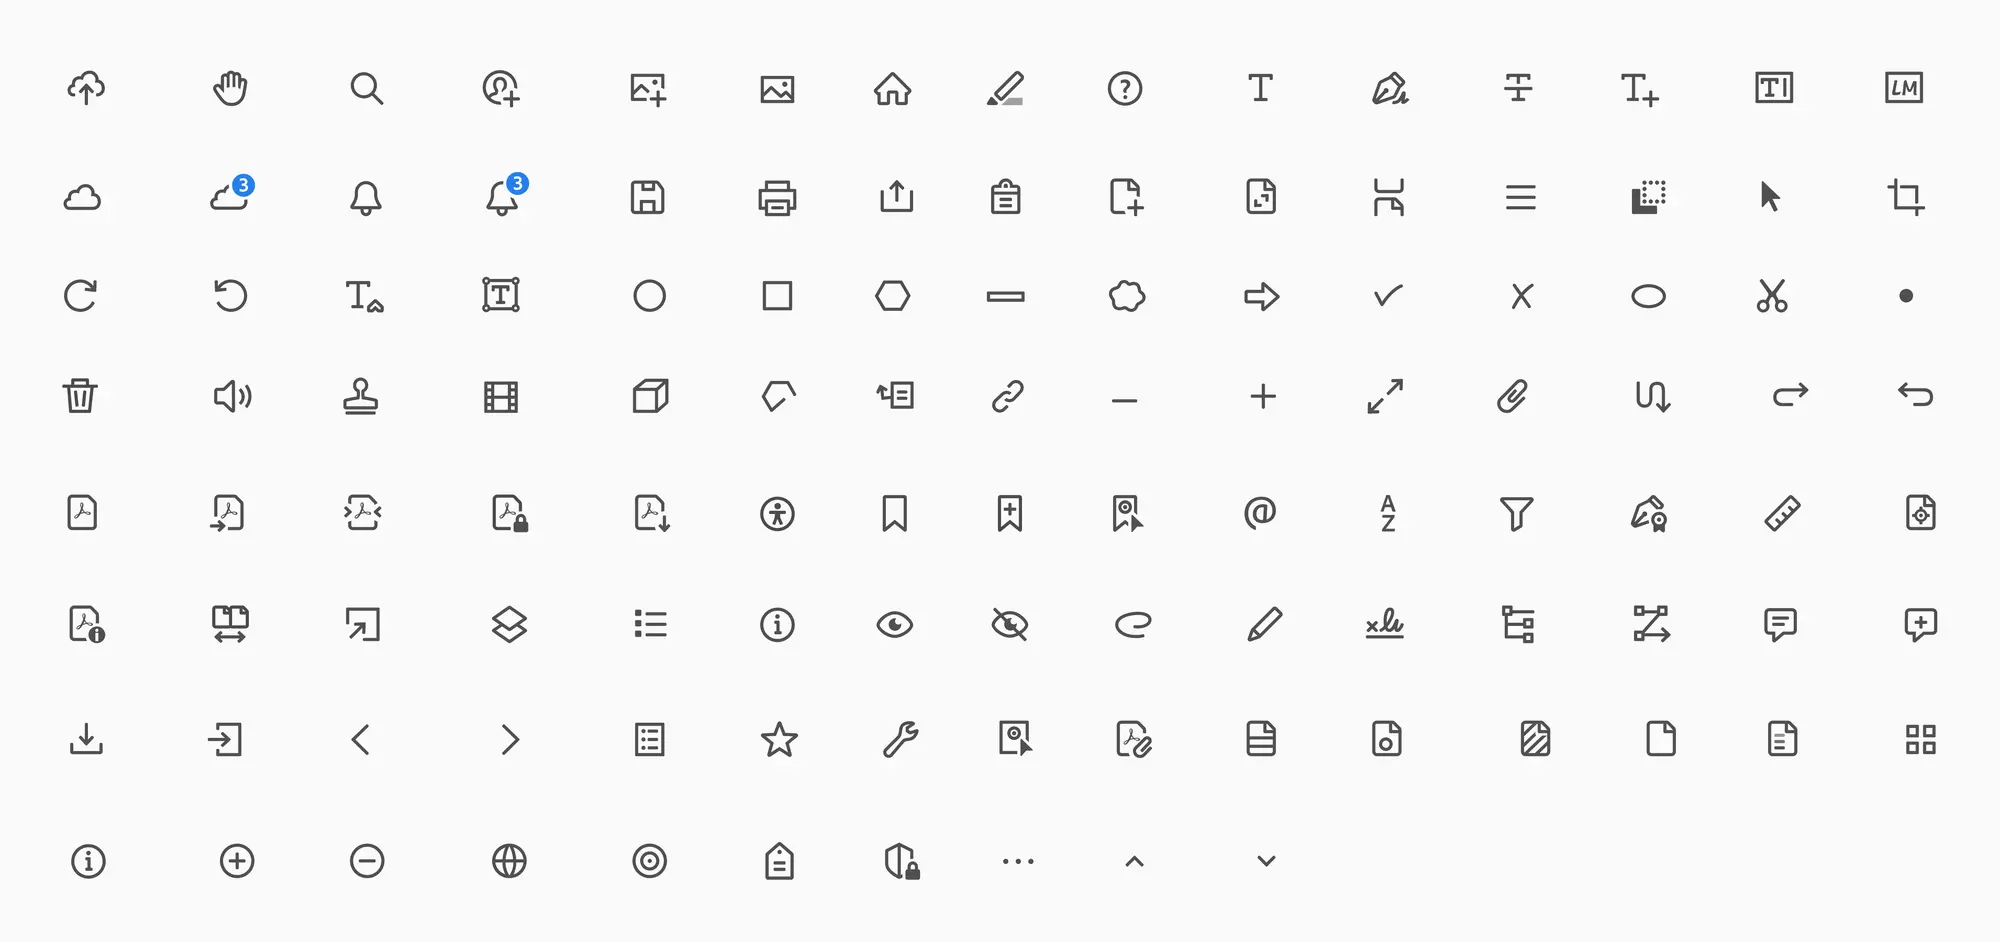 Adobe Acrobat's newly-designed in-app icons in fifteen rows of eight.